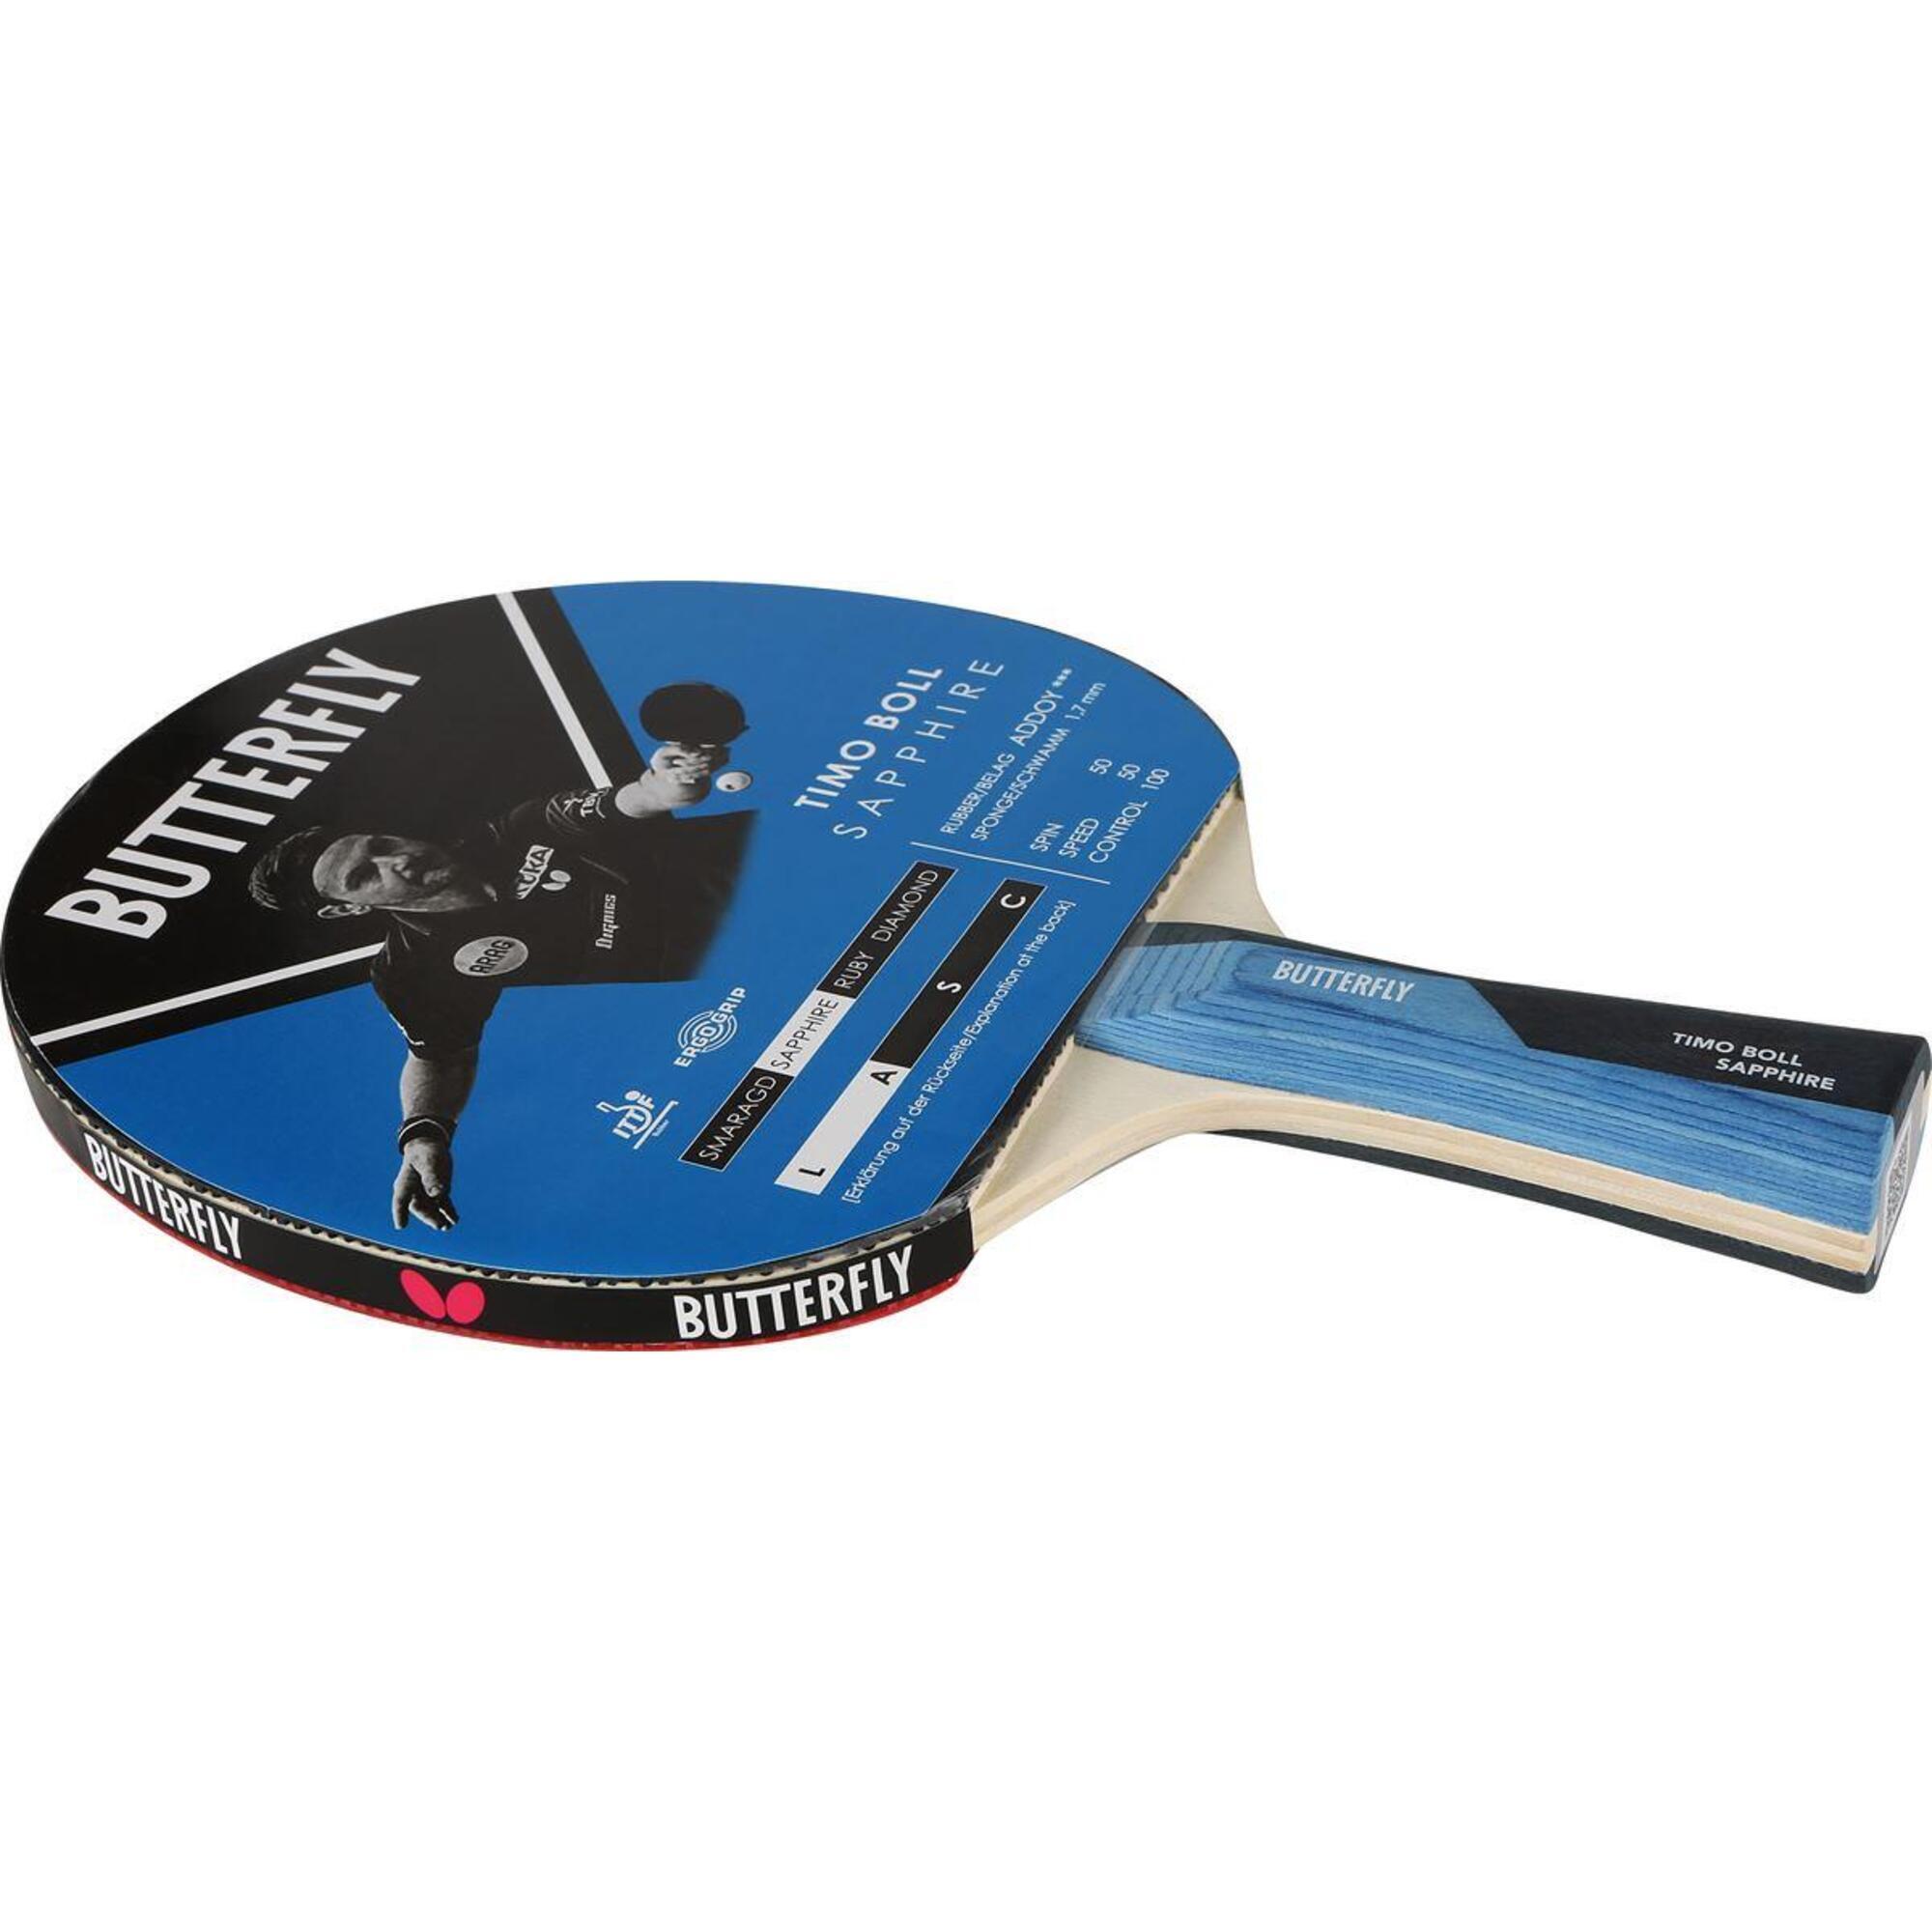 BUTTERFLY Butterfly Timo Boll Sapphire